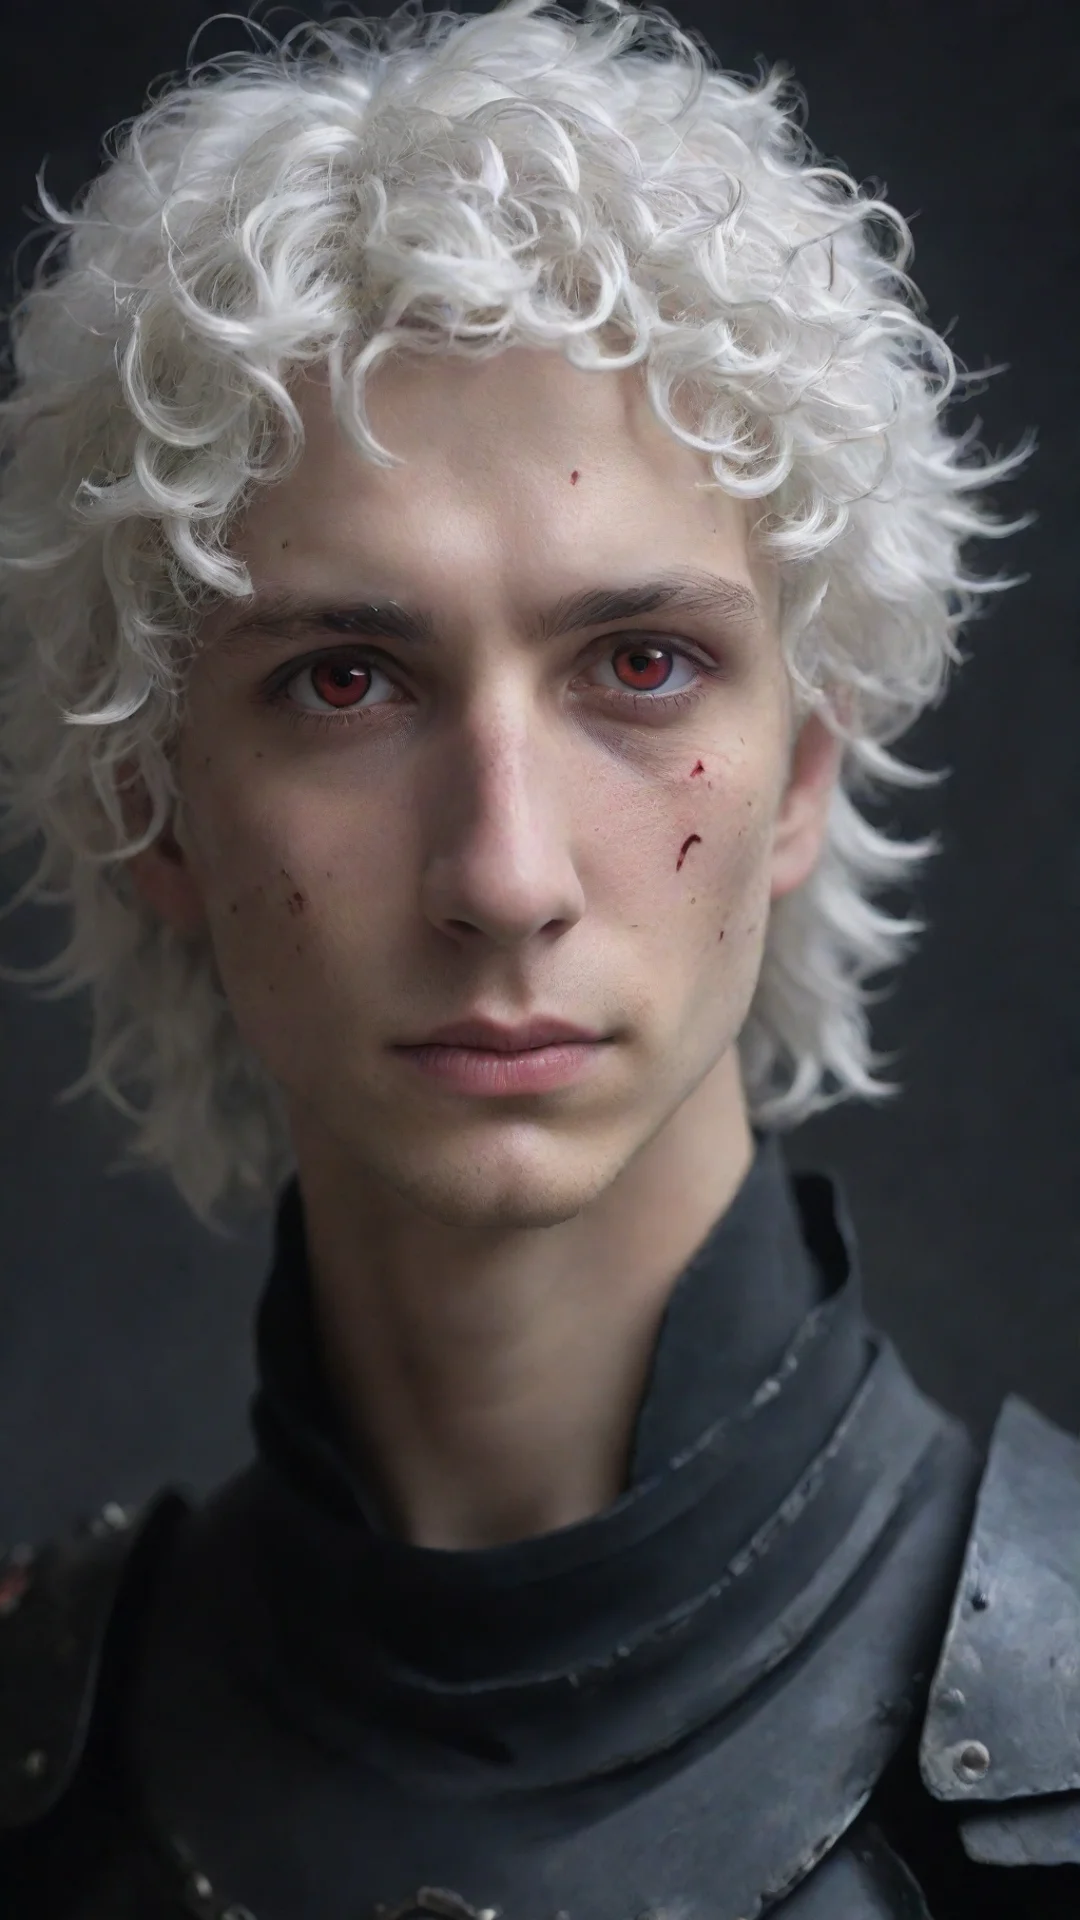 amazing a young man%252c with fully black armor%252c he has a pale and melancholic face with scars on his face%252c he has short curly white hair and red eyes amazing awesome portrait 2 awesome port